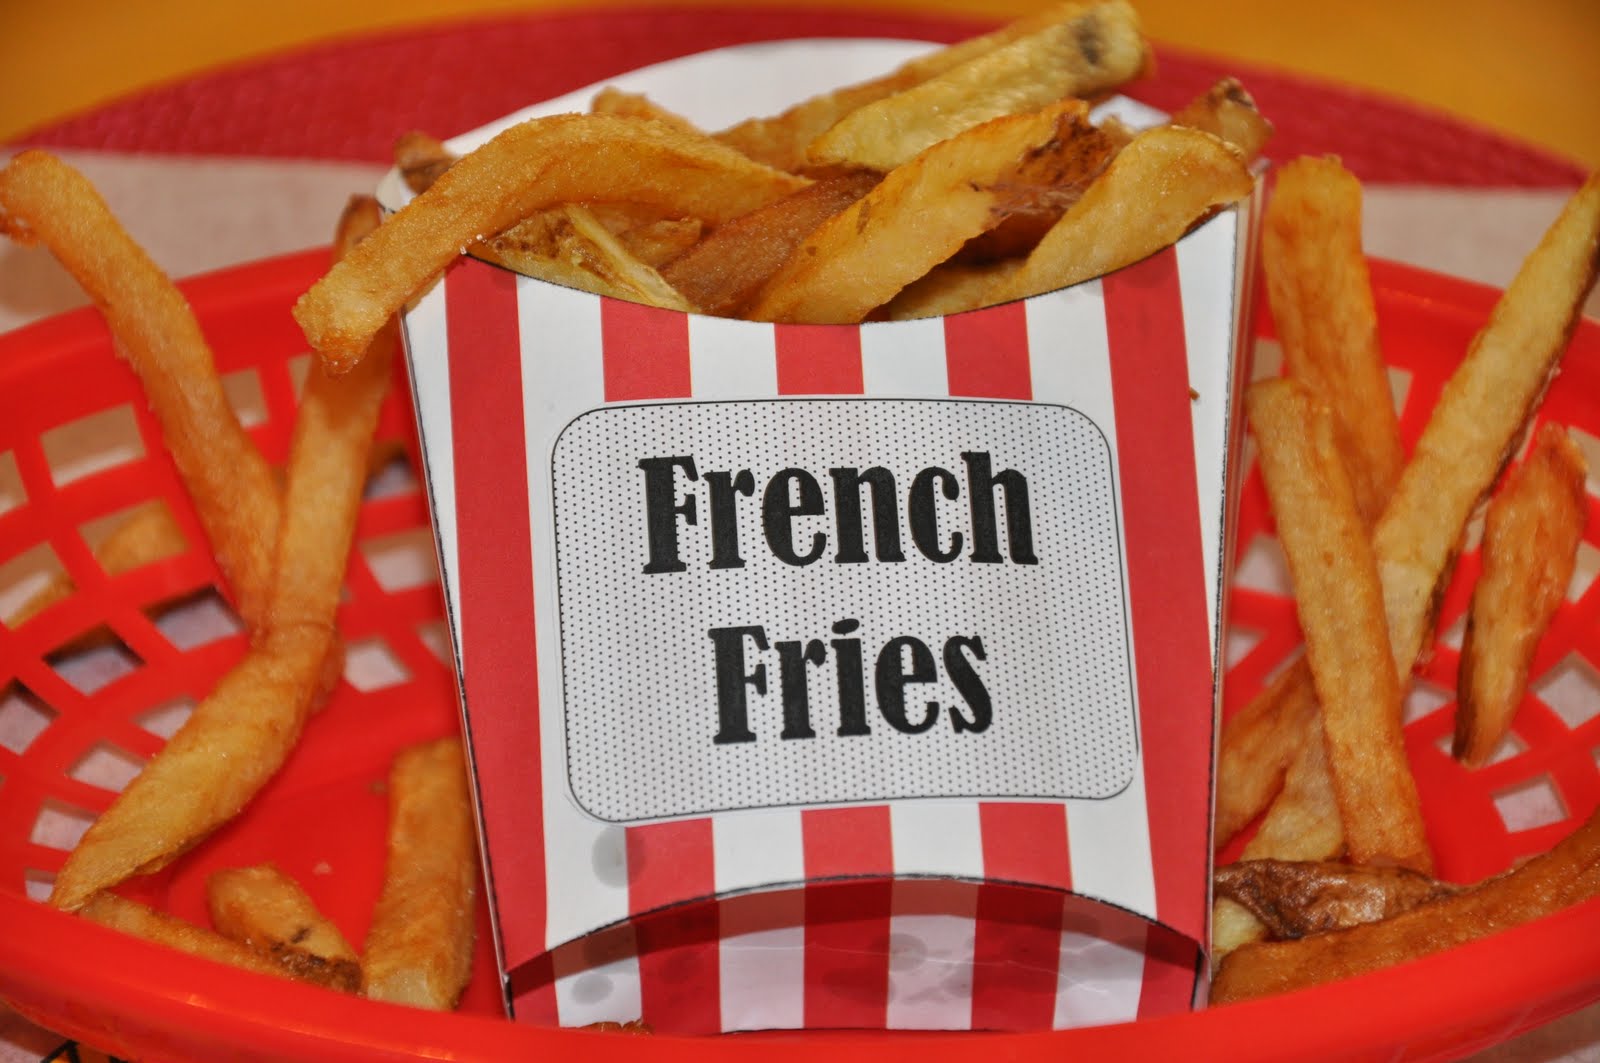 French fried перевод. French Fries перевод. Британский английский a French Fries. Give me the French Fries. French Fries where invented.